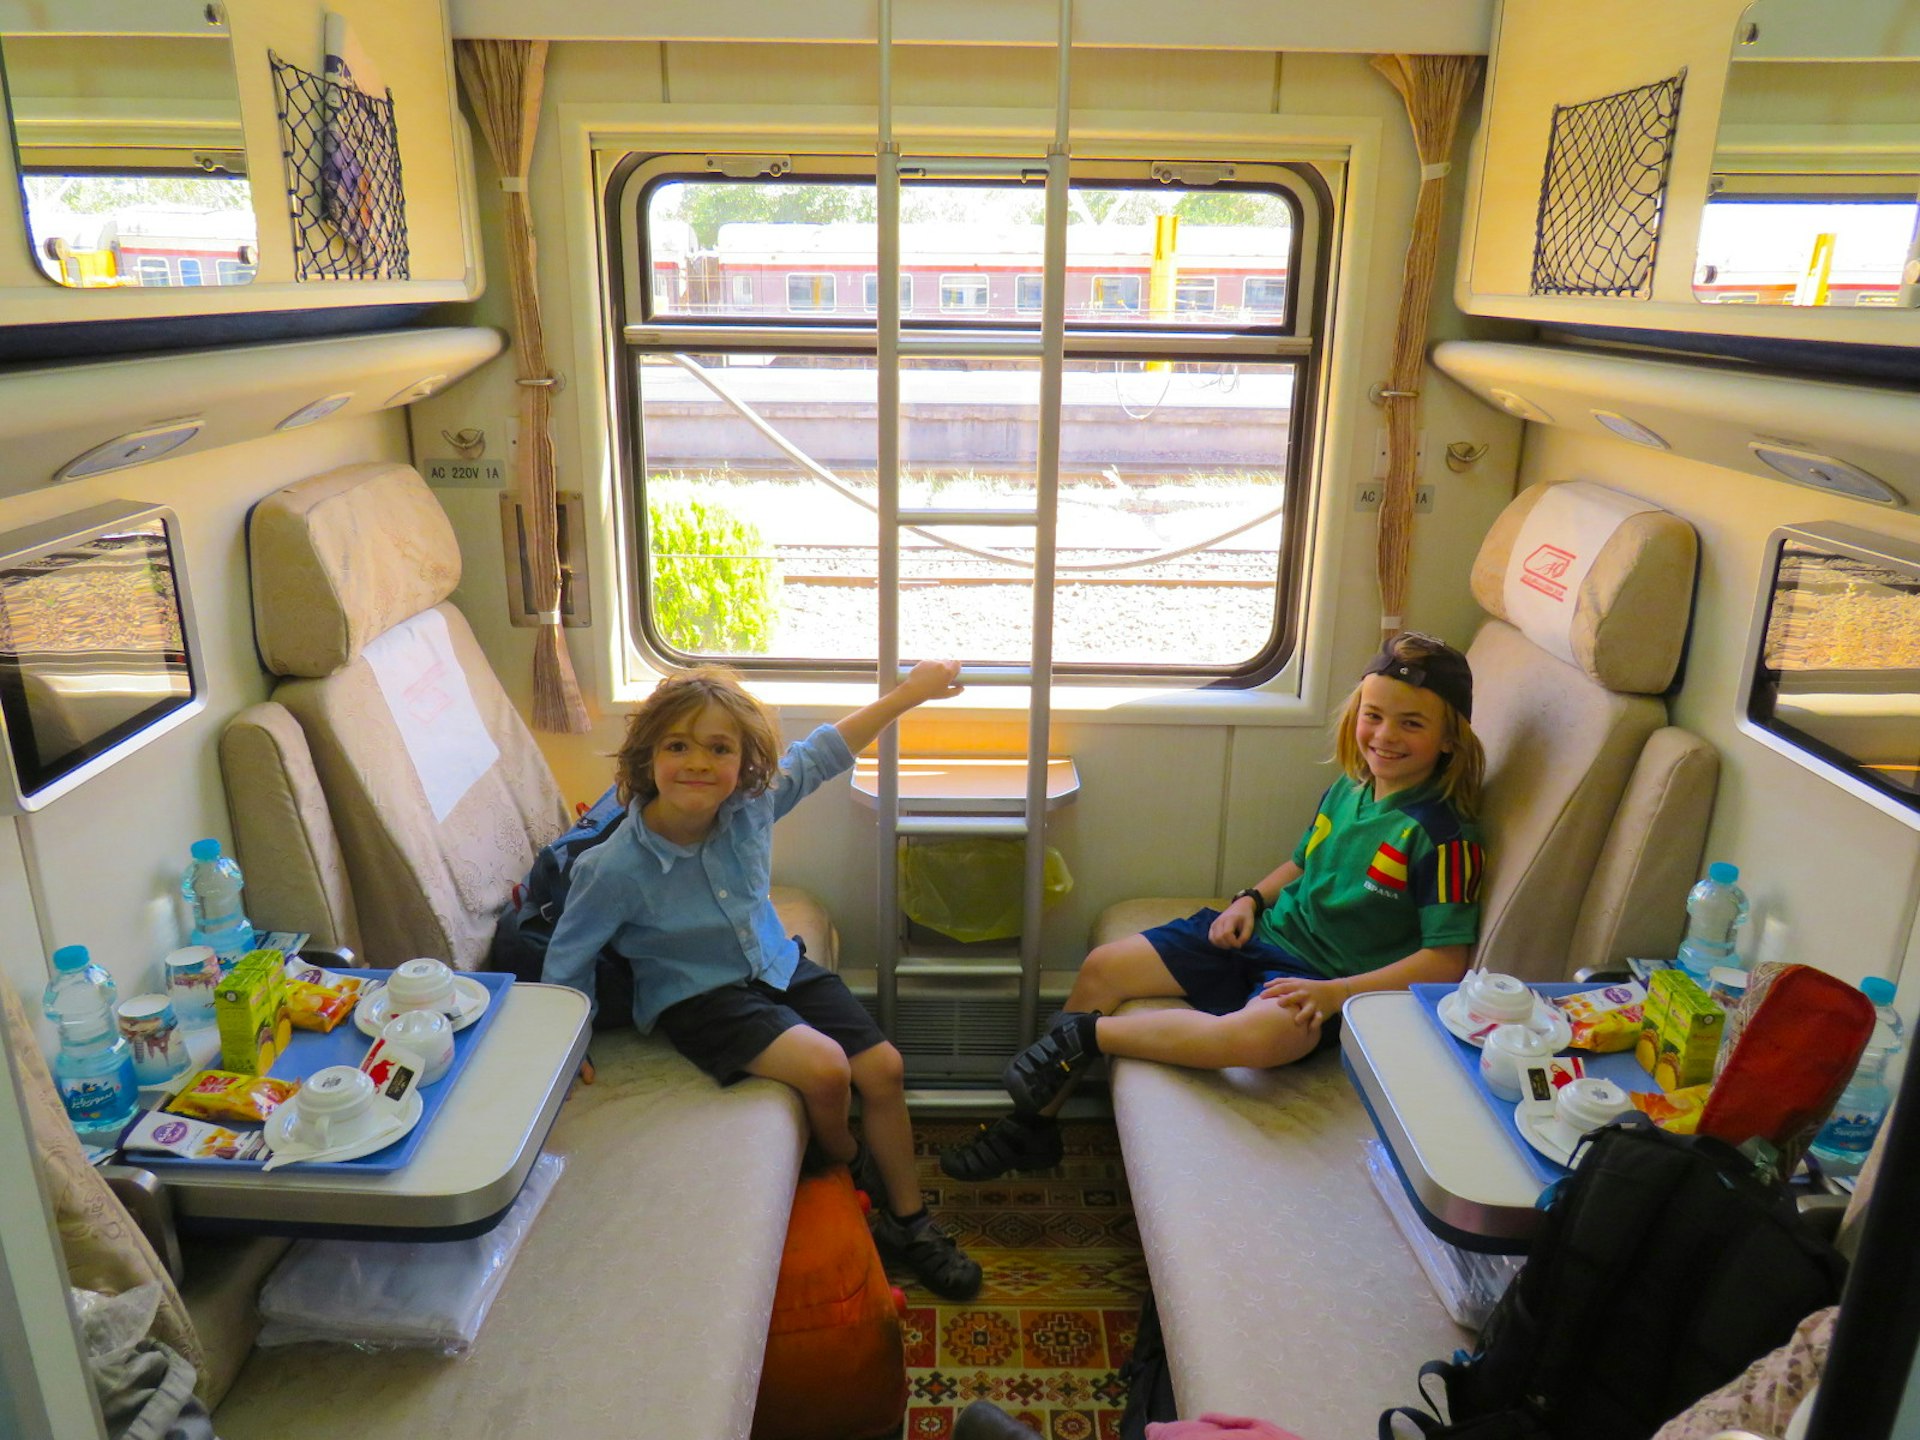 Two young boys sit in a compartment on a train, smiling at the camera